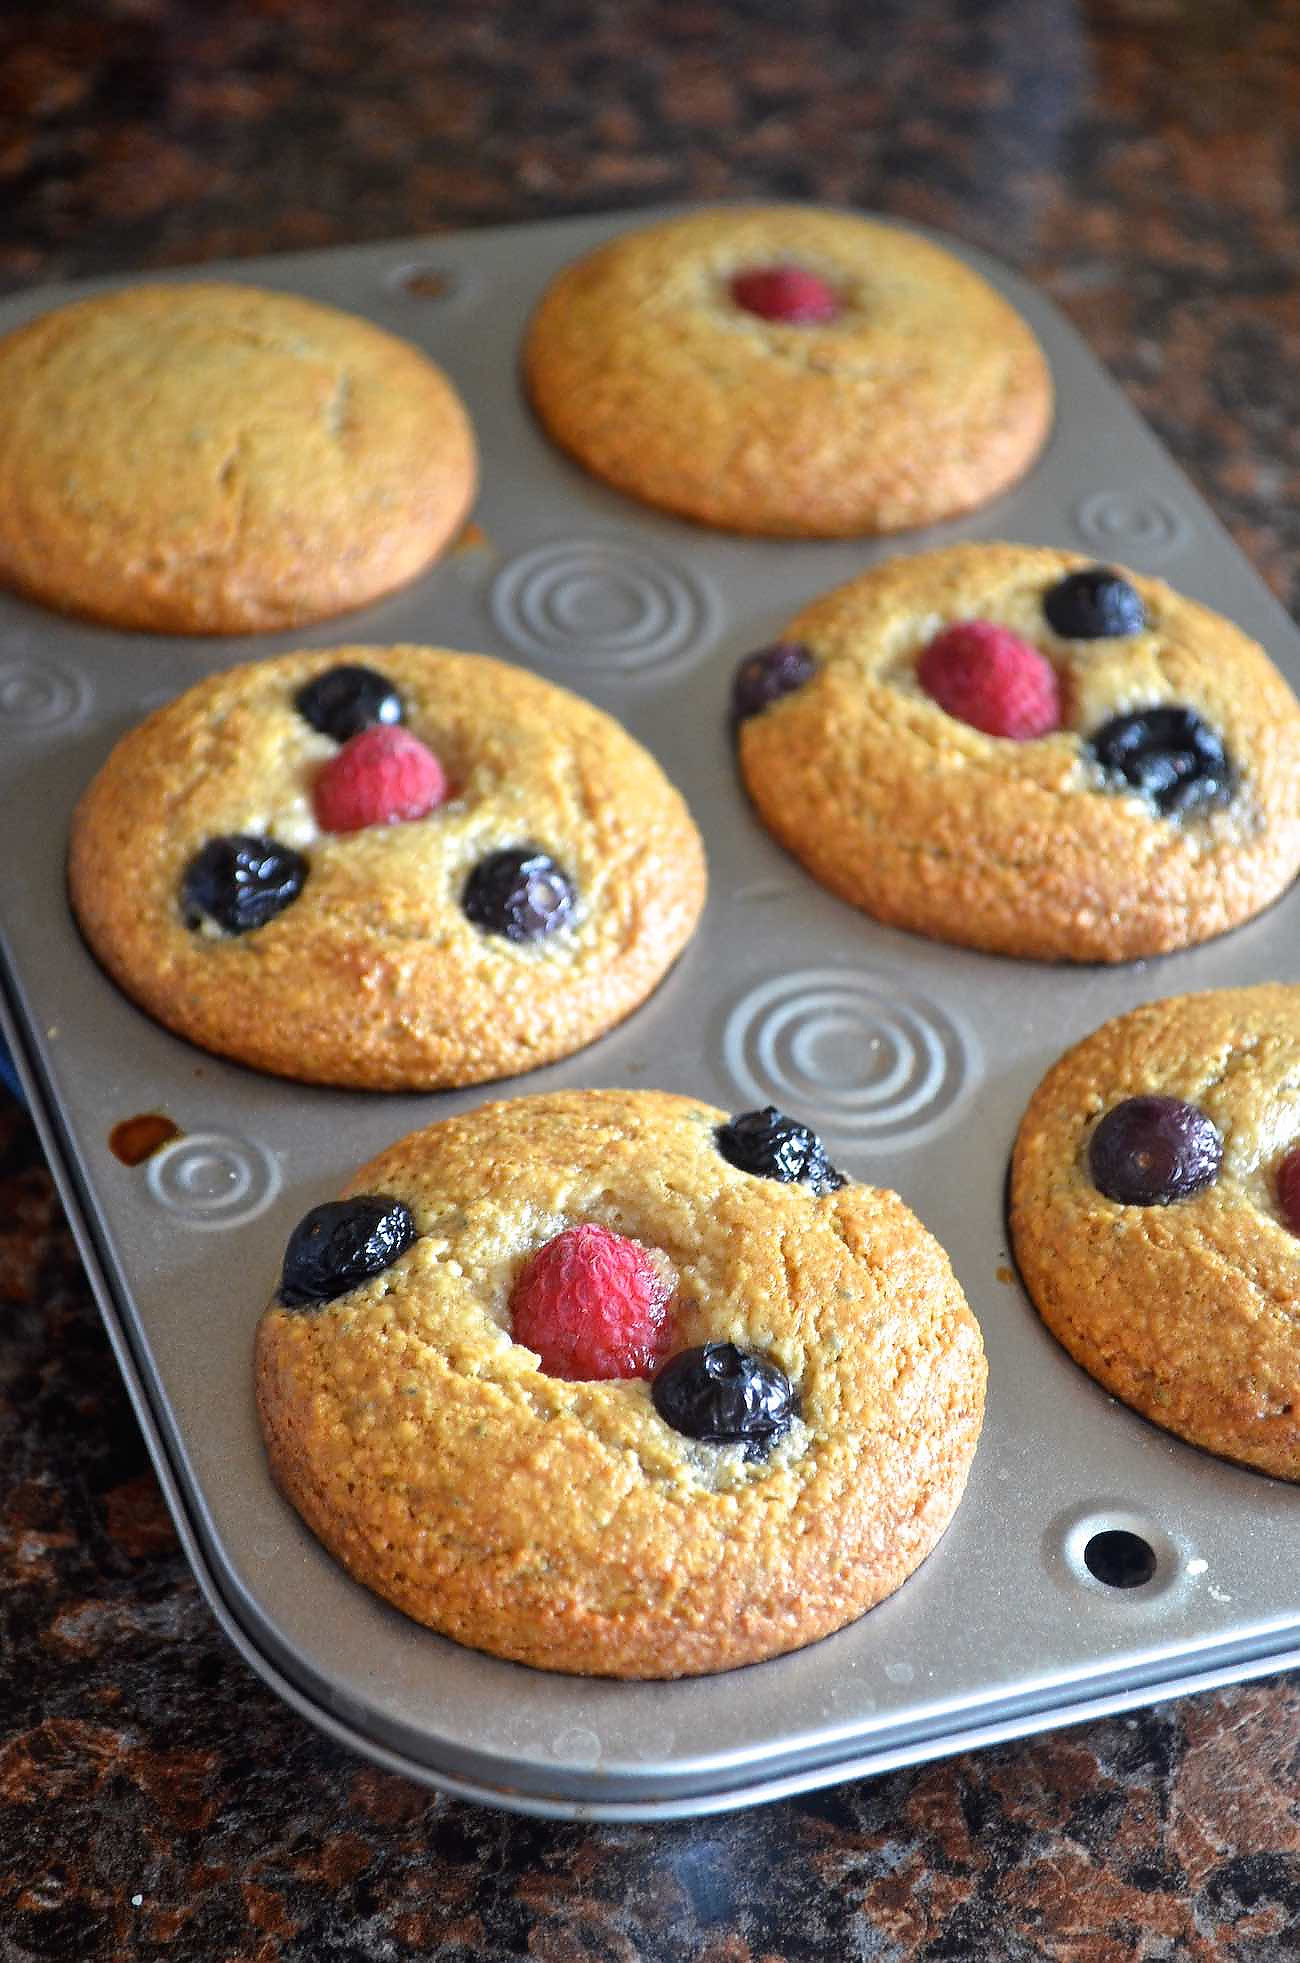 Almond Meal Muffins Recipe (Gluten Free and Grain Free)